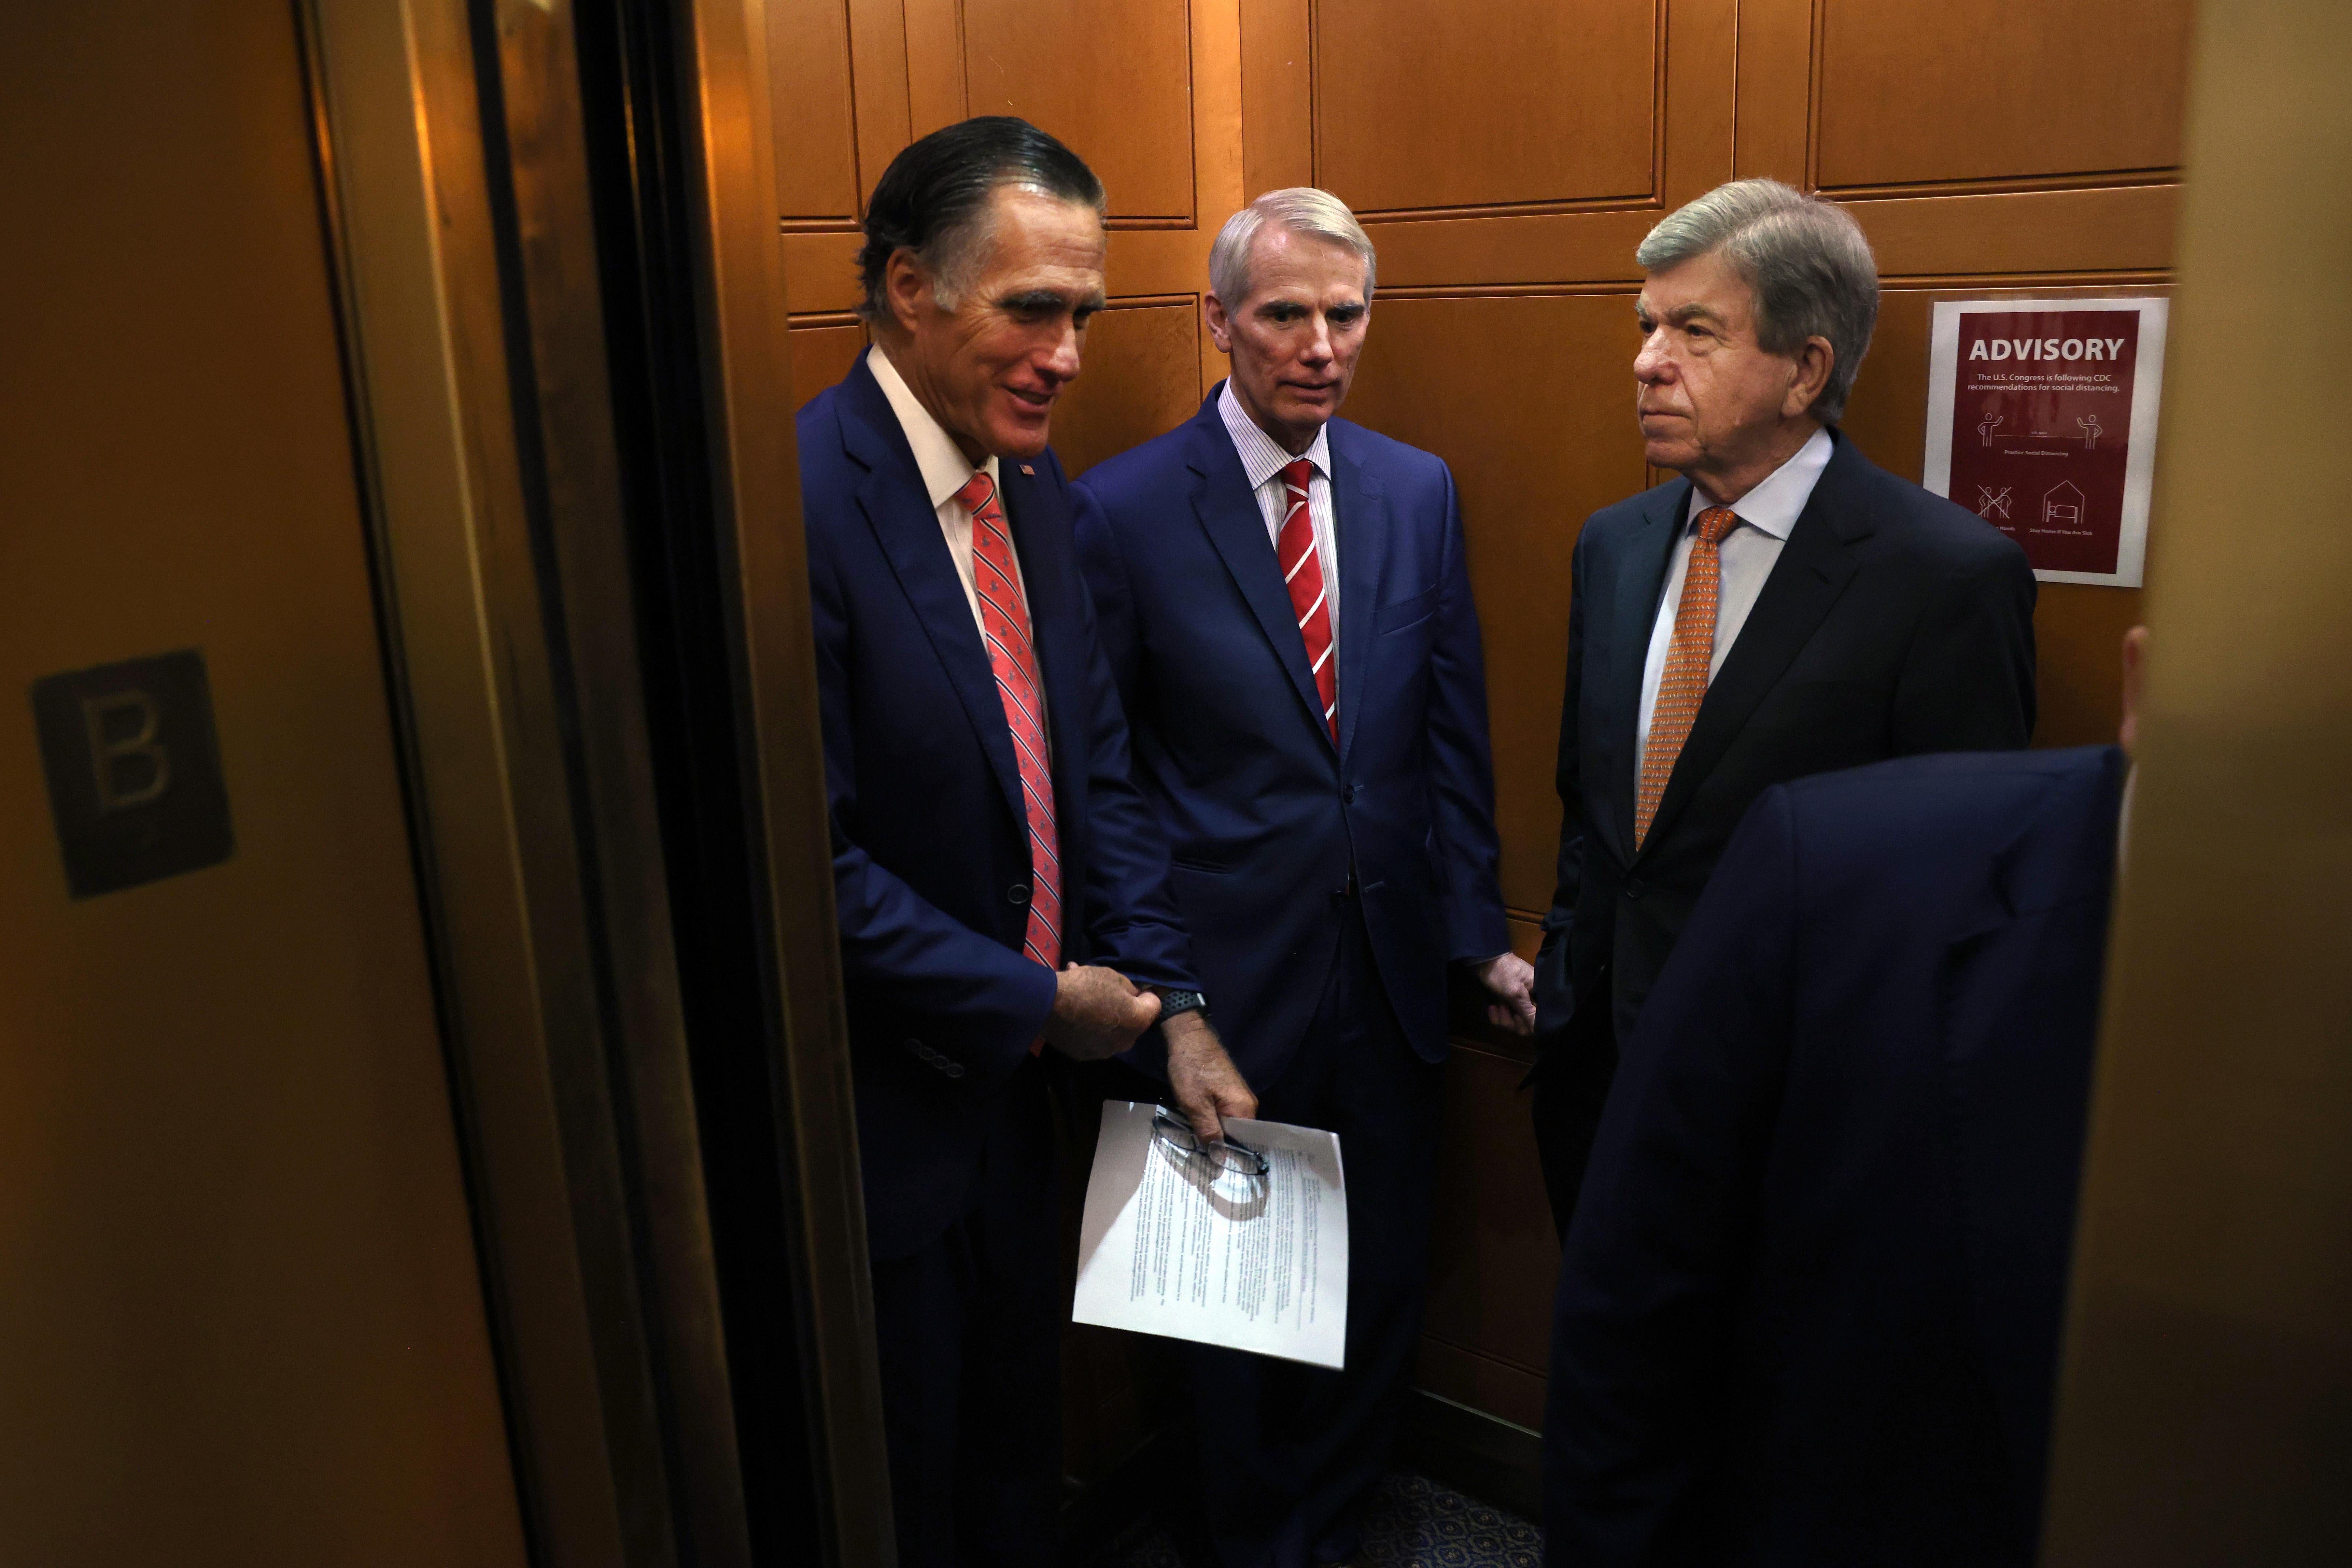 WASHINGTON, DC - JULY 13: (L-R) Sen. Mitt Romney (R-UT), Sen. Rob Portman (R-OH) and Sen. Roy Blunt (R-MO) ride an elevator as they leave a bipartisan meeting on infrastructure at the U.S. Capitol on July 13, 2021 in Washington, DC. The Senate returned from a two-week recess with hopes of passing a more than $1 trillion bipartisan infrastructure plan. (Photo by Kevin Dietsch/Getty Images)